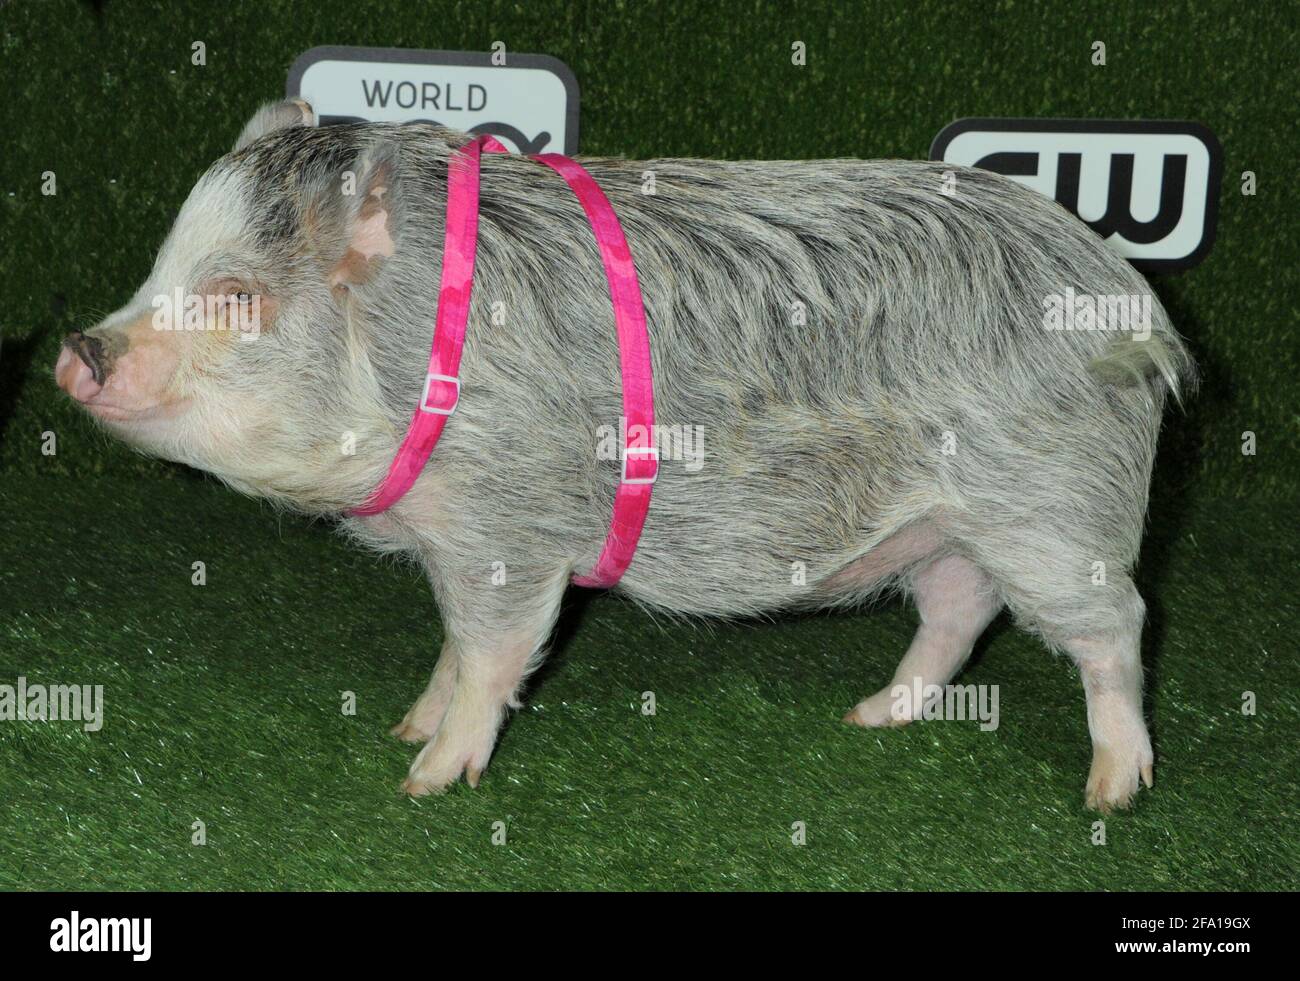 Amy Trotter the Pig on the green carpet during the 2016 World Dog Awards, held at Barker Hanger in Santa Monica, California, Saturday, January 9, 2016.  Photo by Jennifer Graylock-Graylock.com 917-519-7666 Stock Photo